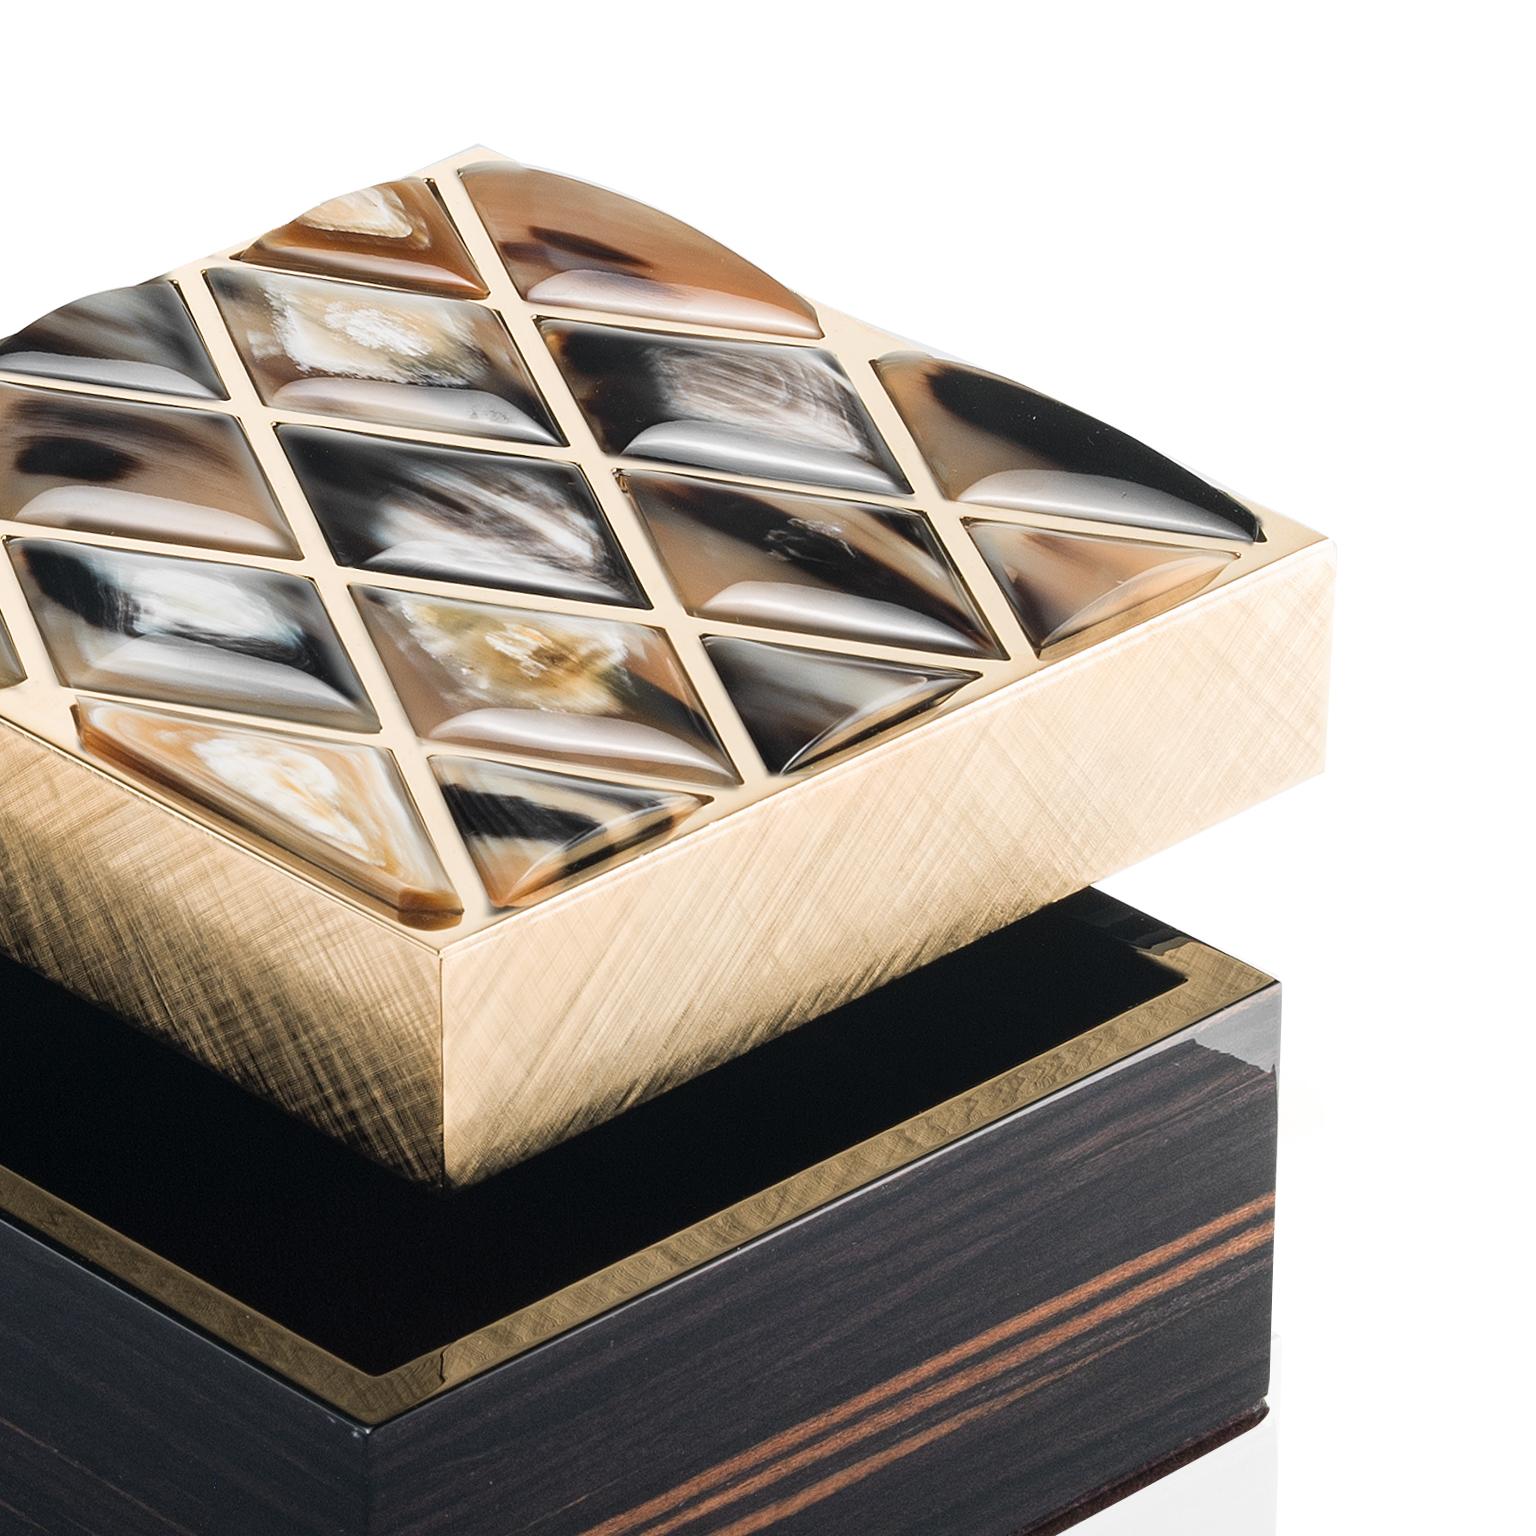 Designed to ensure your most valued trinkets are kept organized and safe, our Fedora box makes the perfect home for all your treasures and keepsakes. Fashioned from glossy ebony, the box is distinguished by an exquisite lid boasting gorgeous